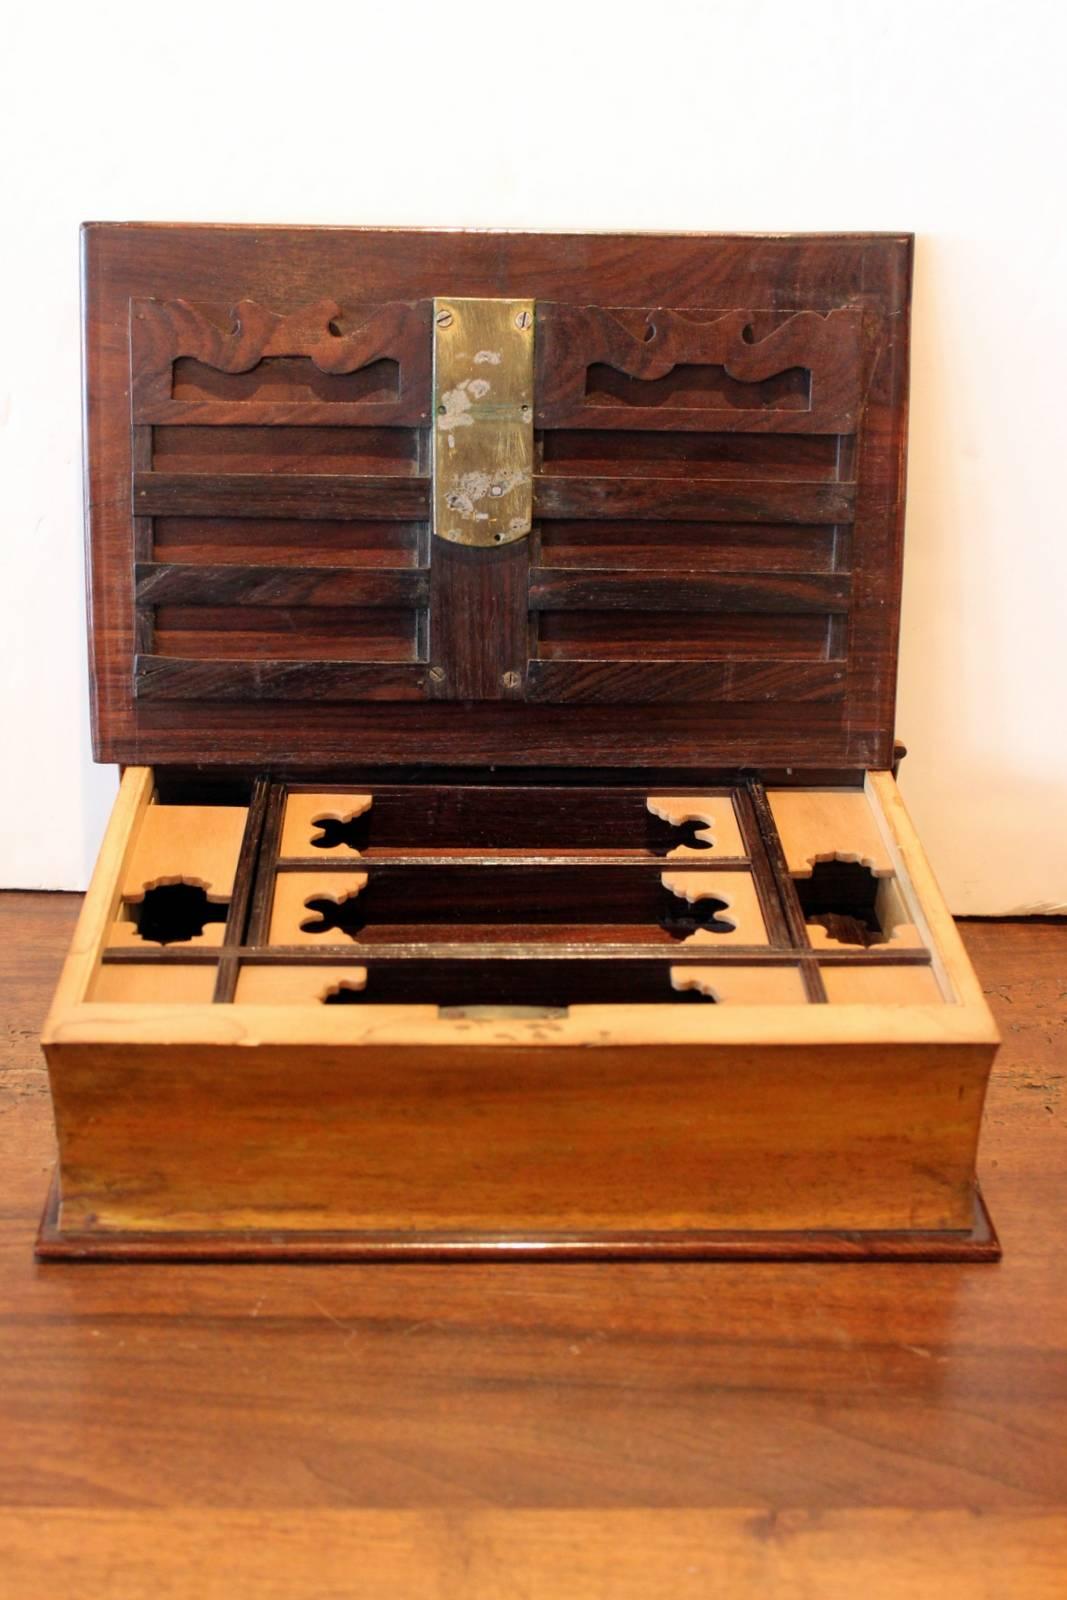 Antique Captain Hardcastle locking note book box, 19th century. The walnut book box with working key, Signed Captain Harcastle on the side. the interior is fitted with compartments of organization.